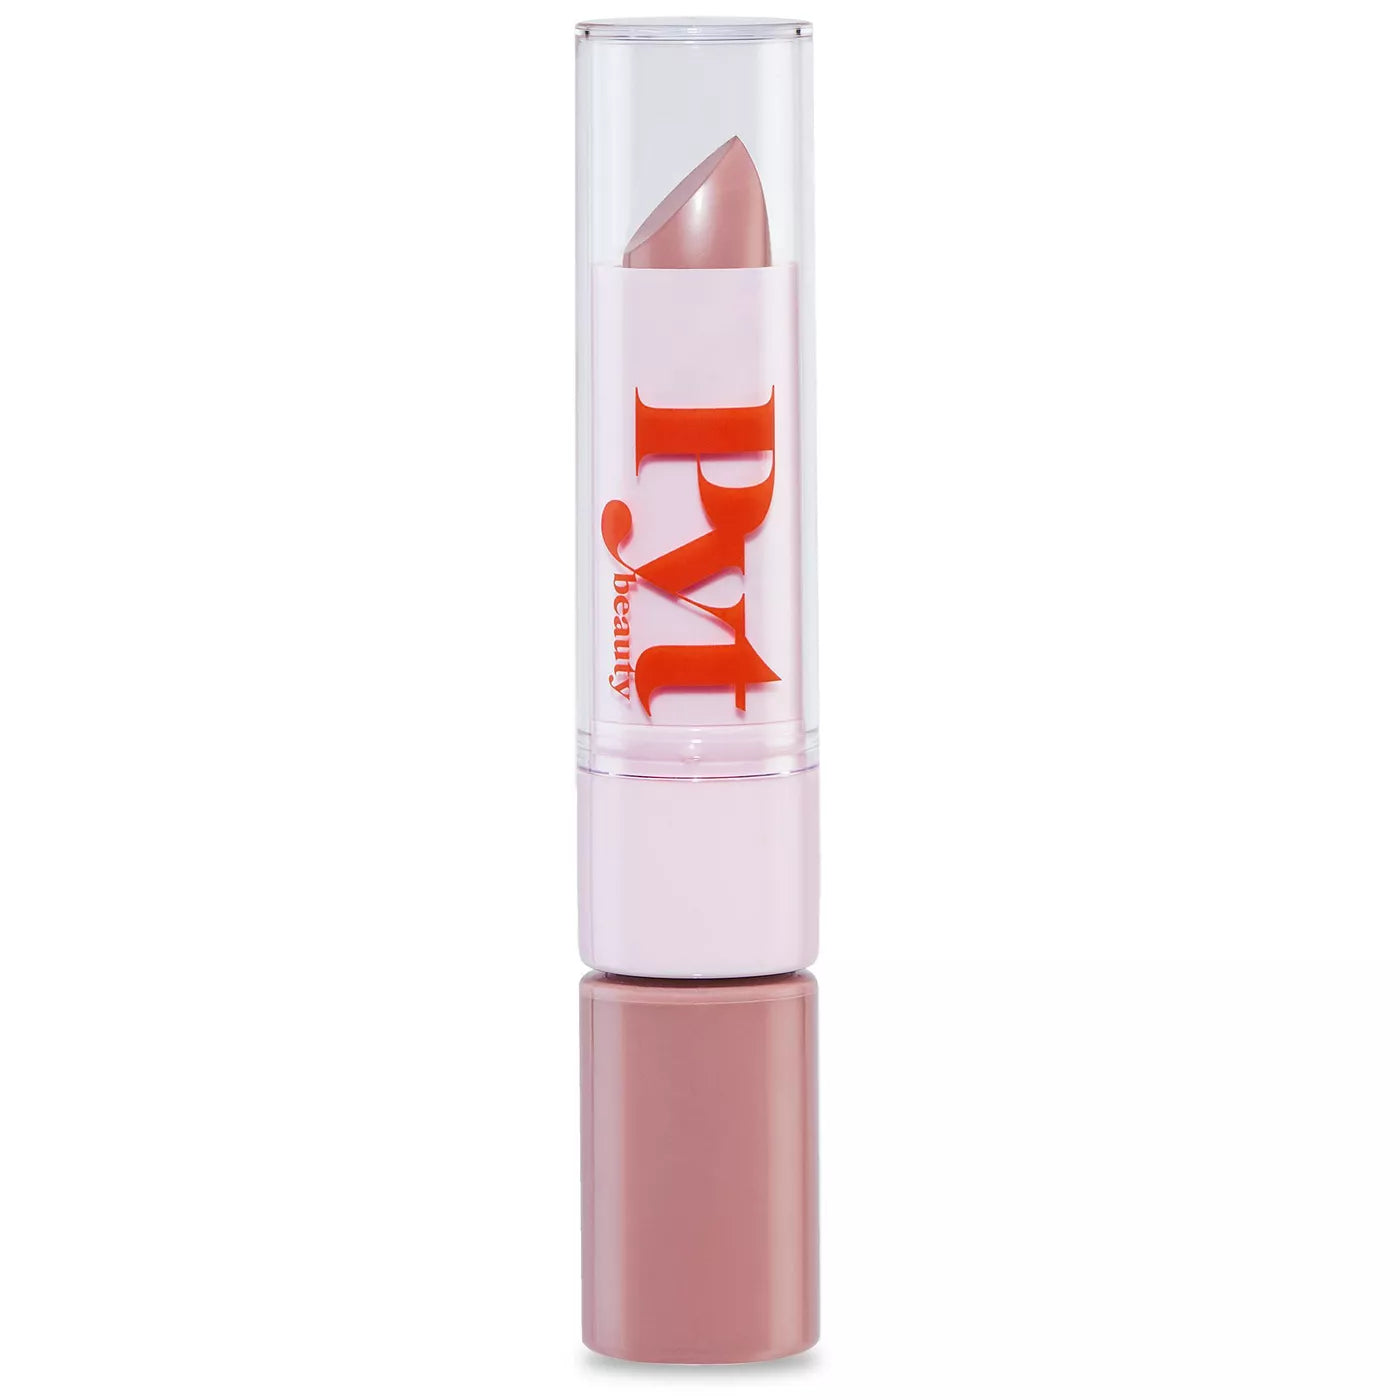 PYT Beauty Friends with Benefits Lipgloss and Lipstick Duo | Icon